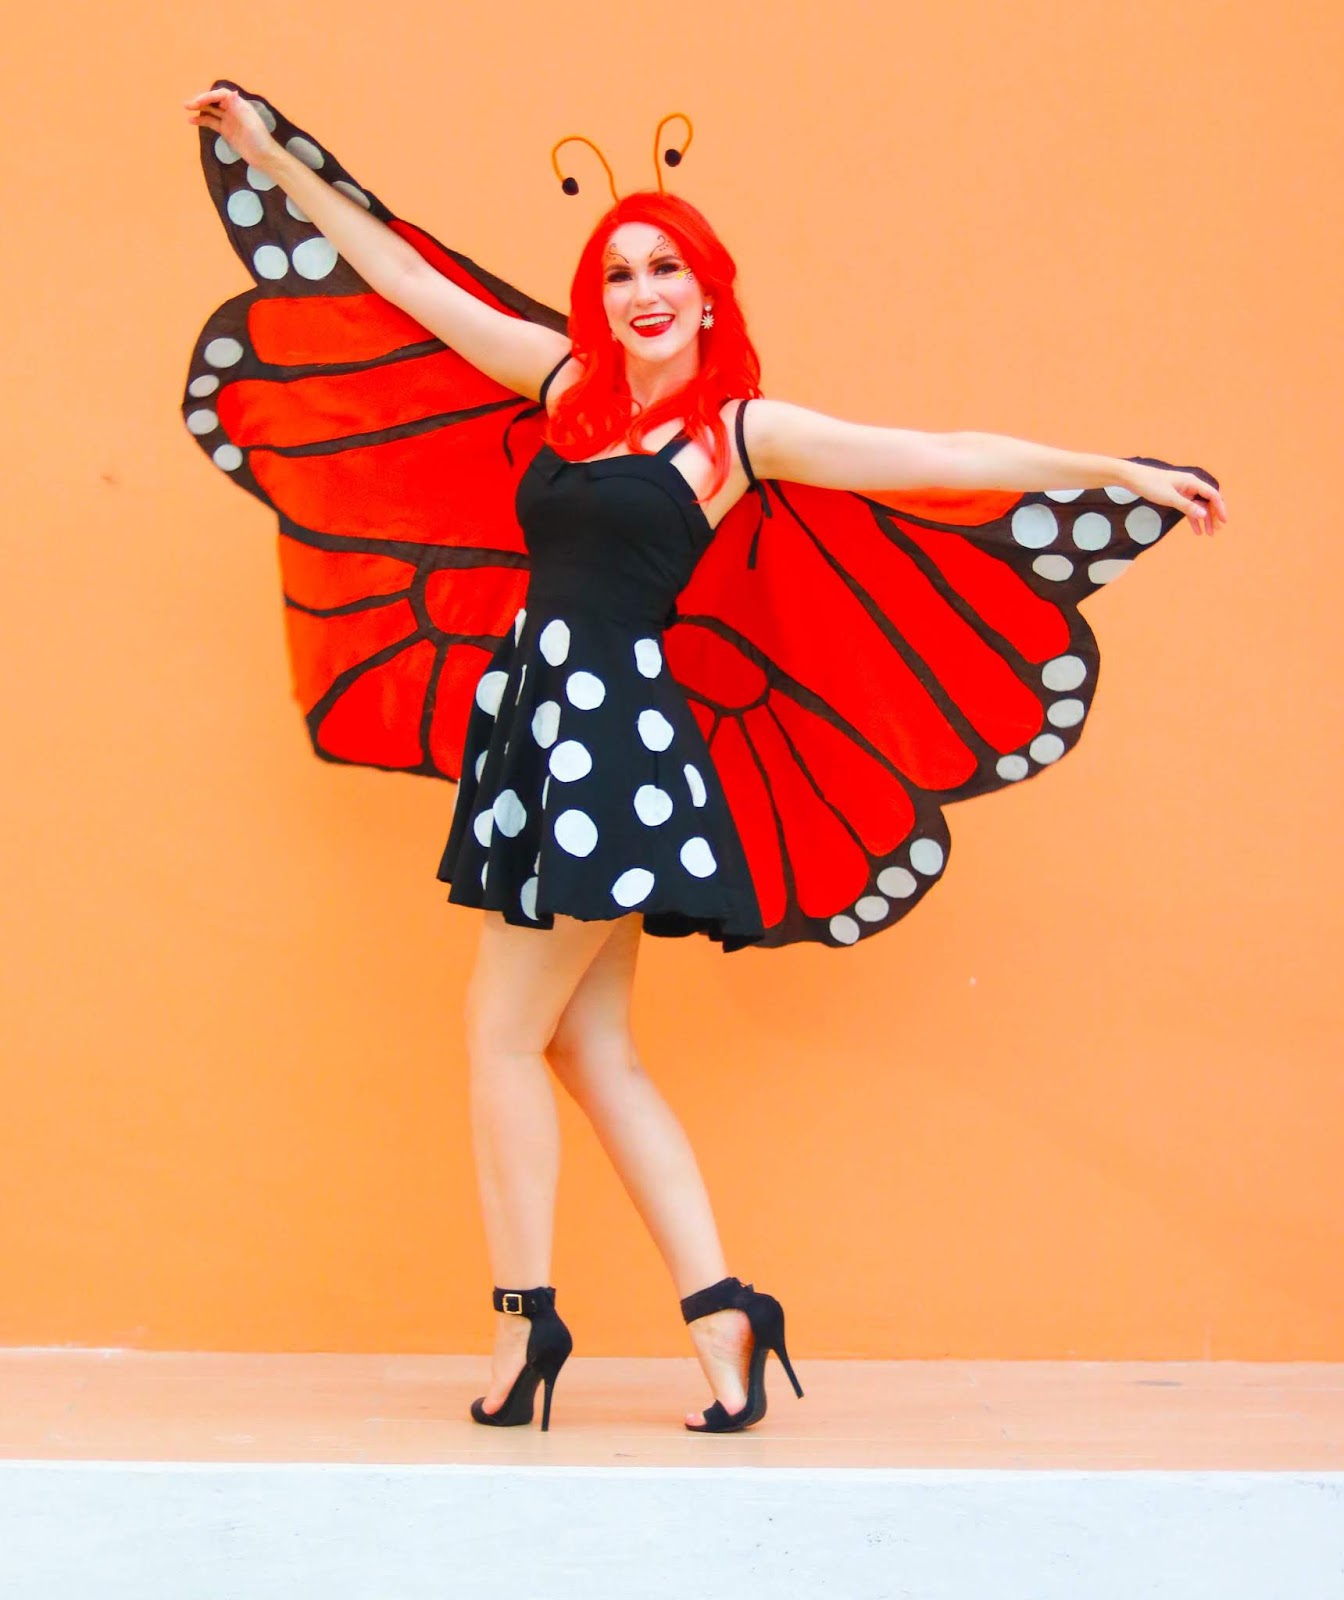 DIY Homemade Butterfly Costume Tutorial - Easy and cheap!